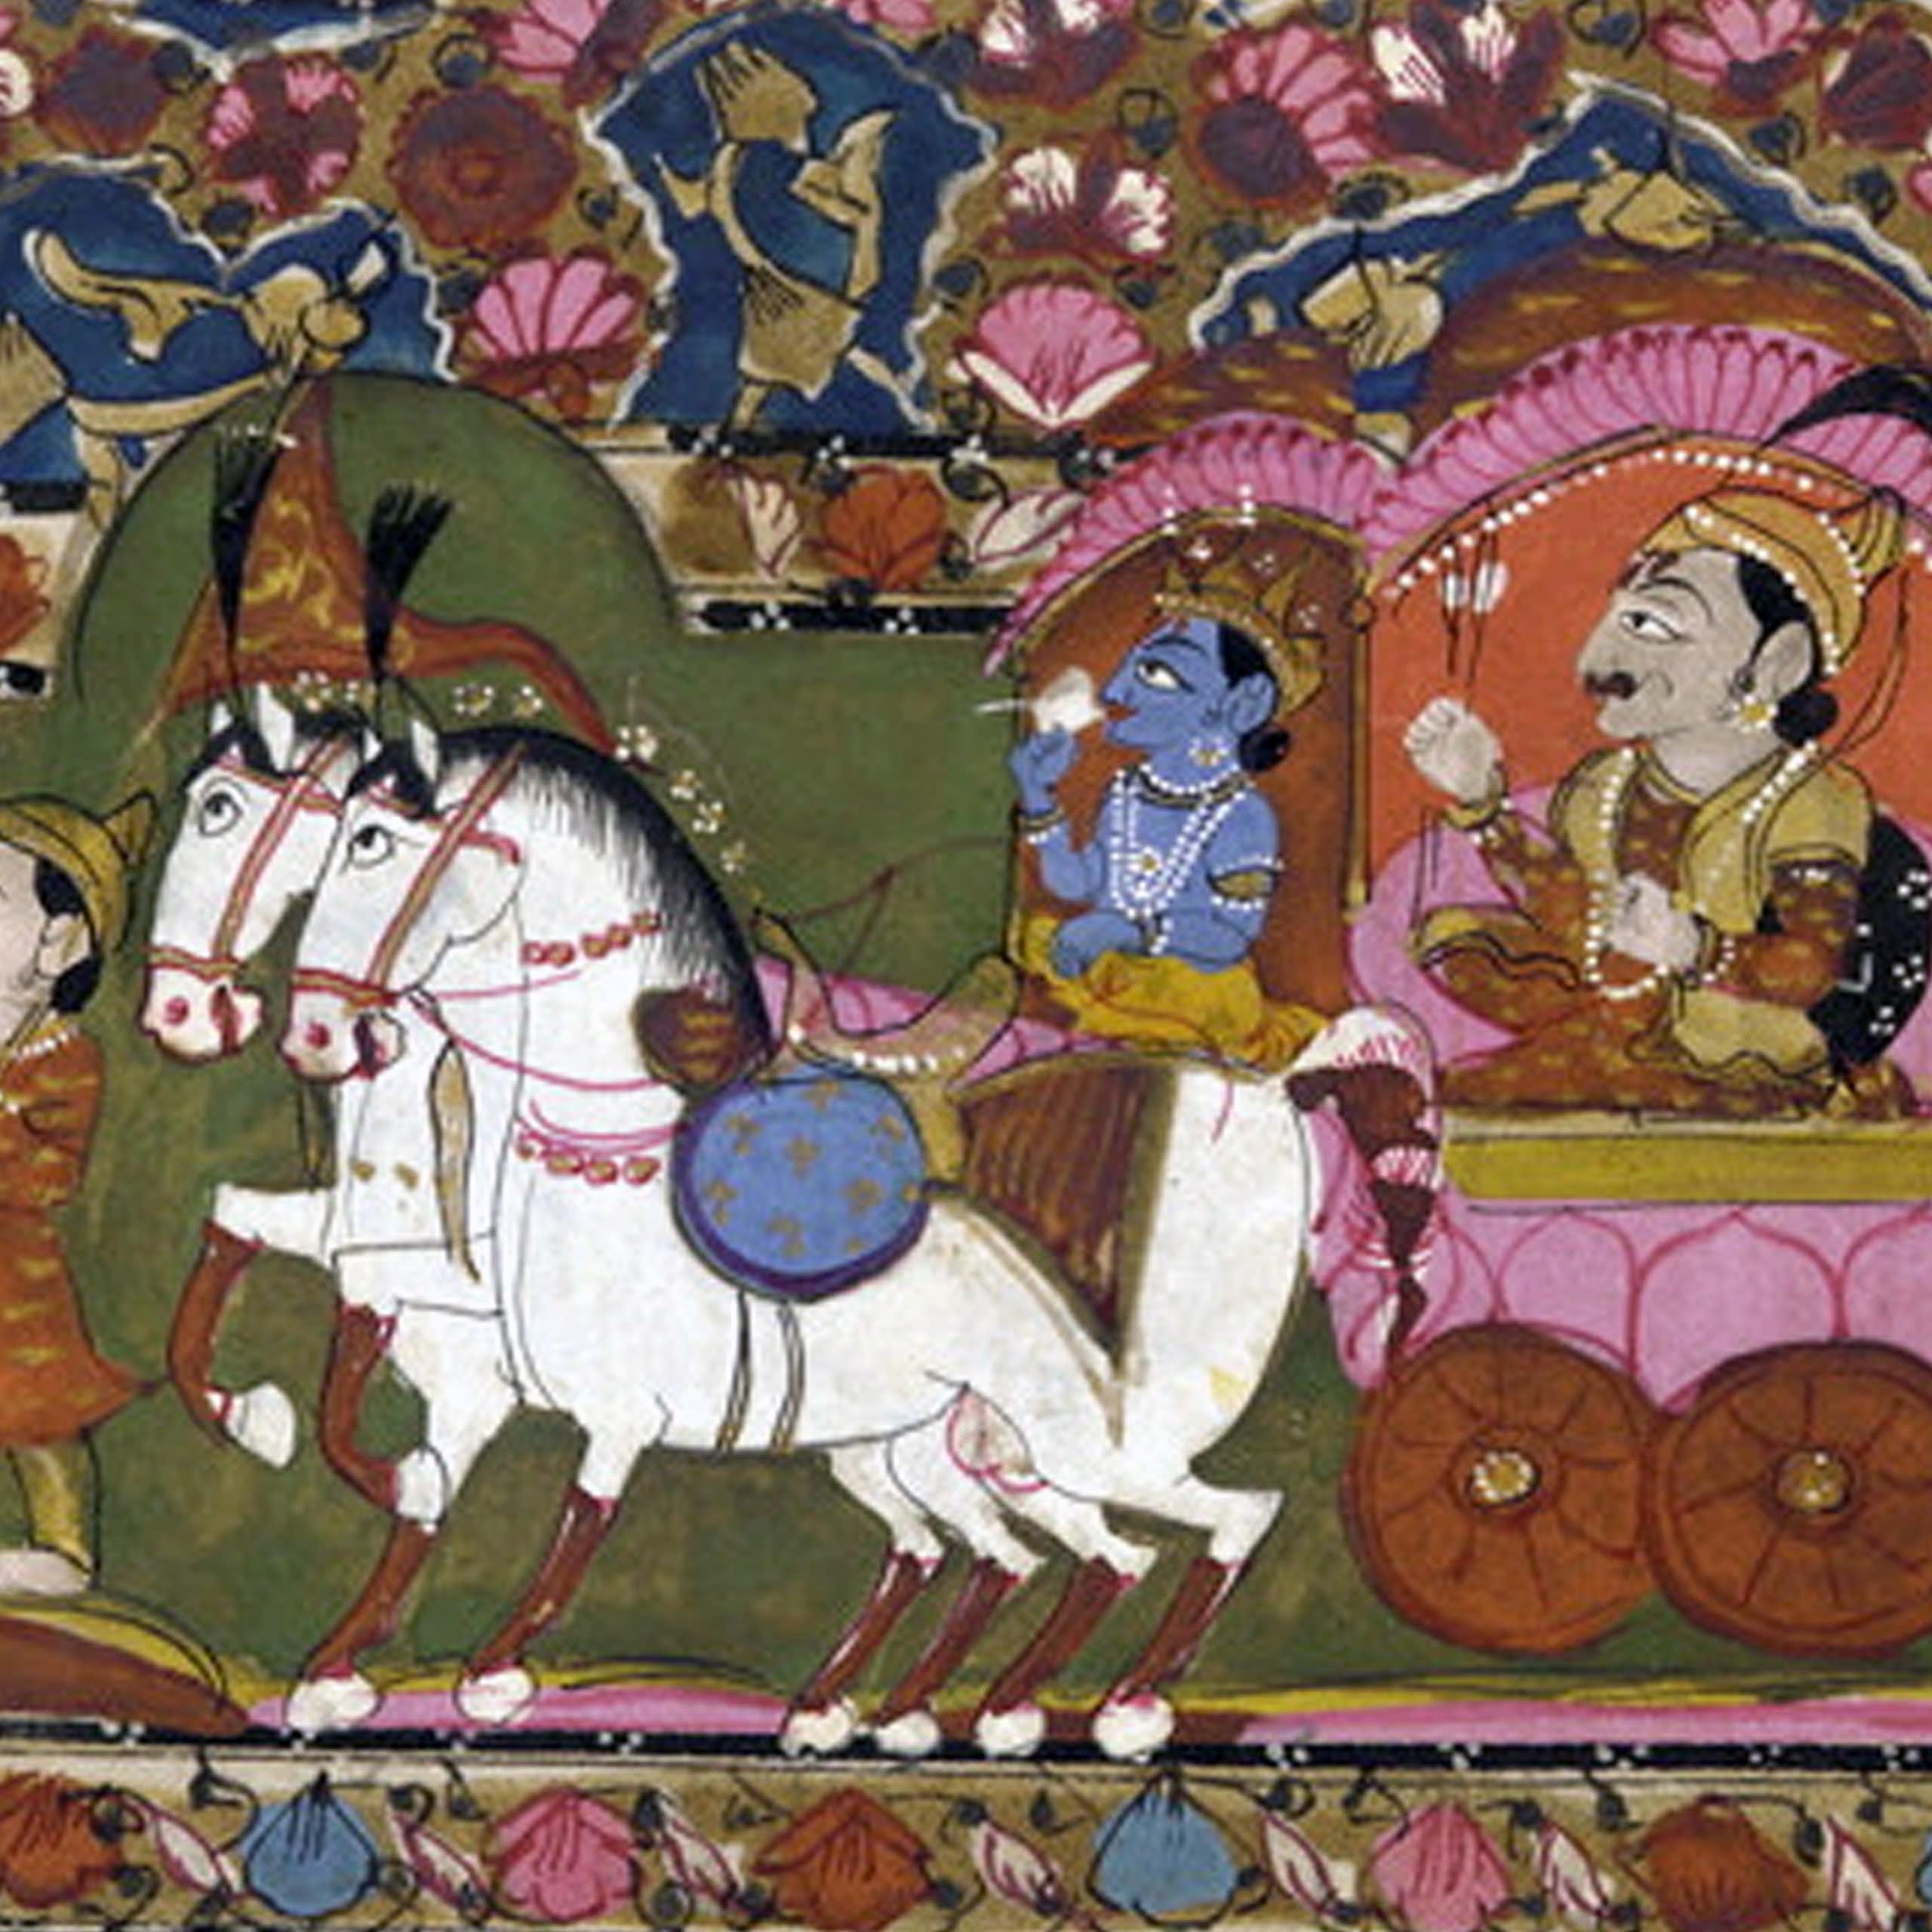 A colorful painting showing a carriage being drawn by two white horses, with the charioteer holding a conch shell and a warrior prince seated at the back, with a bow and arrows.